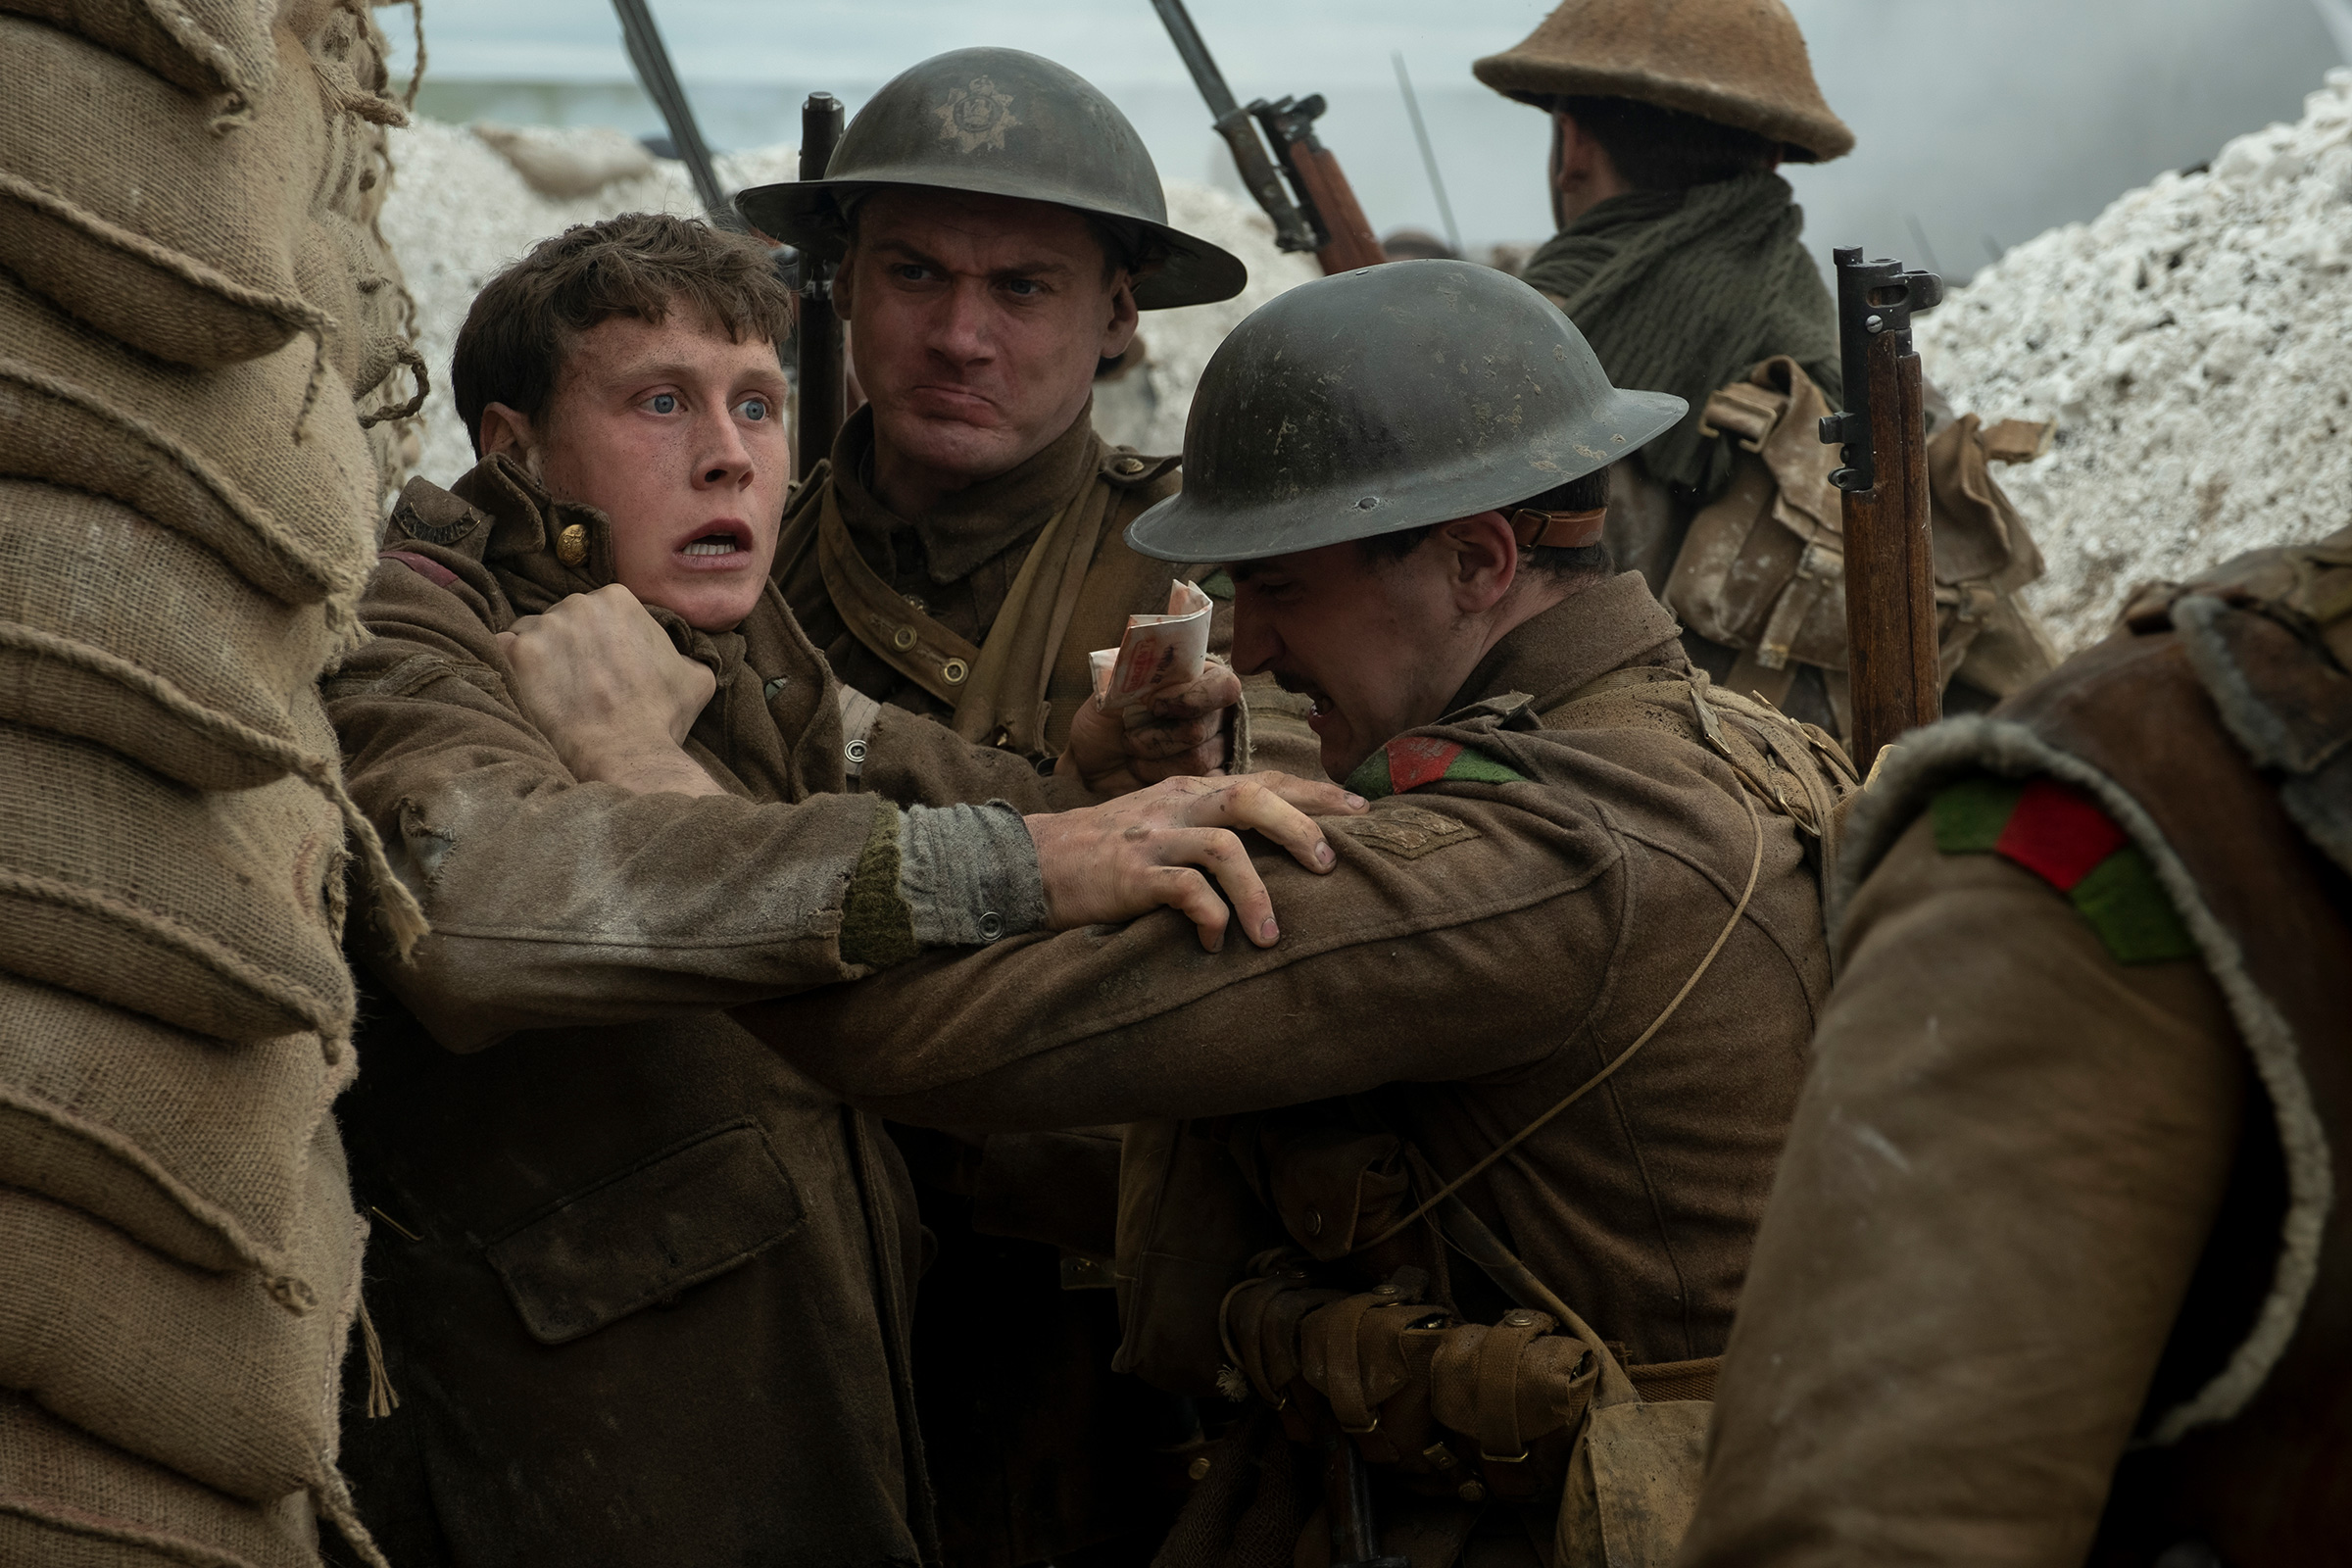 A bracing war drama shot in the style of one continuous take by director Sam Mendes, 1917 was nominated in 10 categories